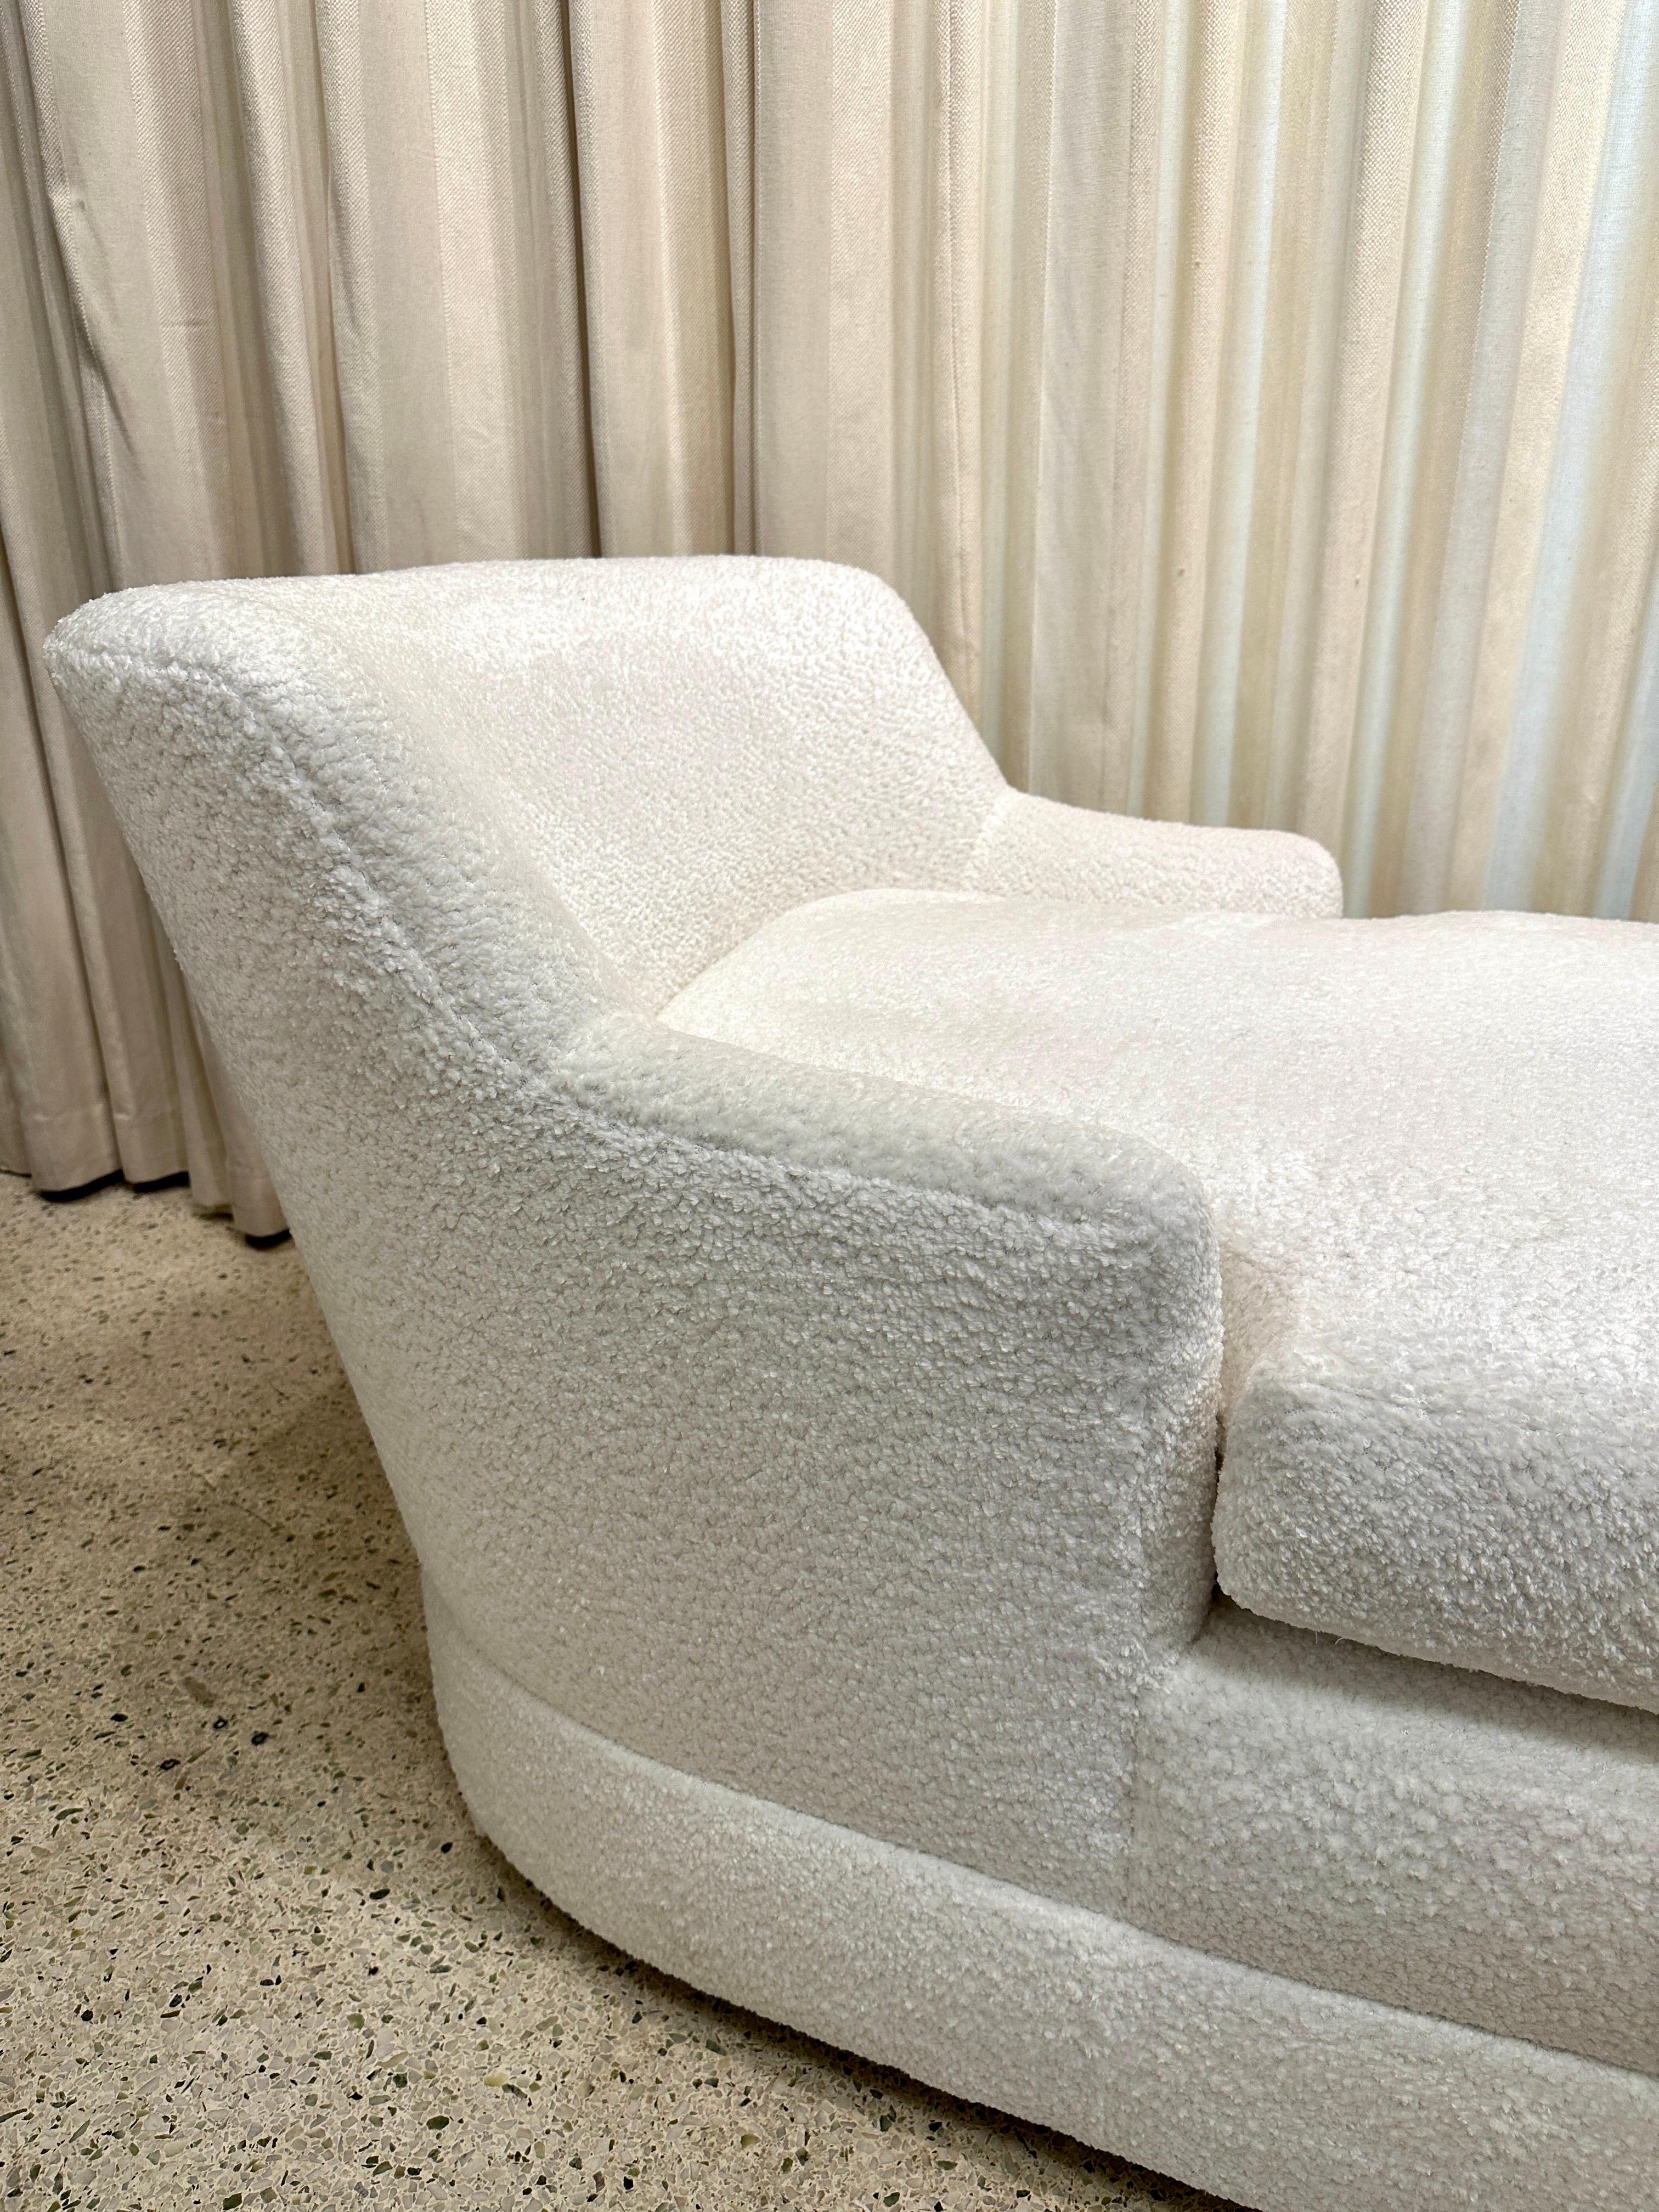 Luxurious Bouclé Covered Chaise Longue In Excellent Condition For Sale In East Hampton, NY